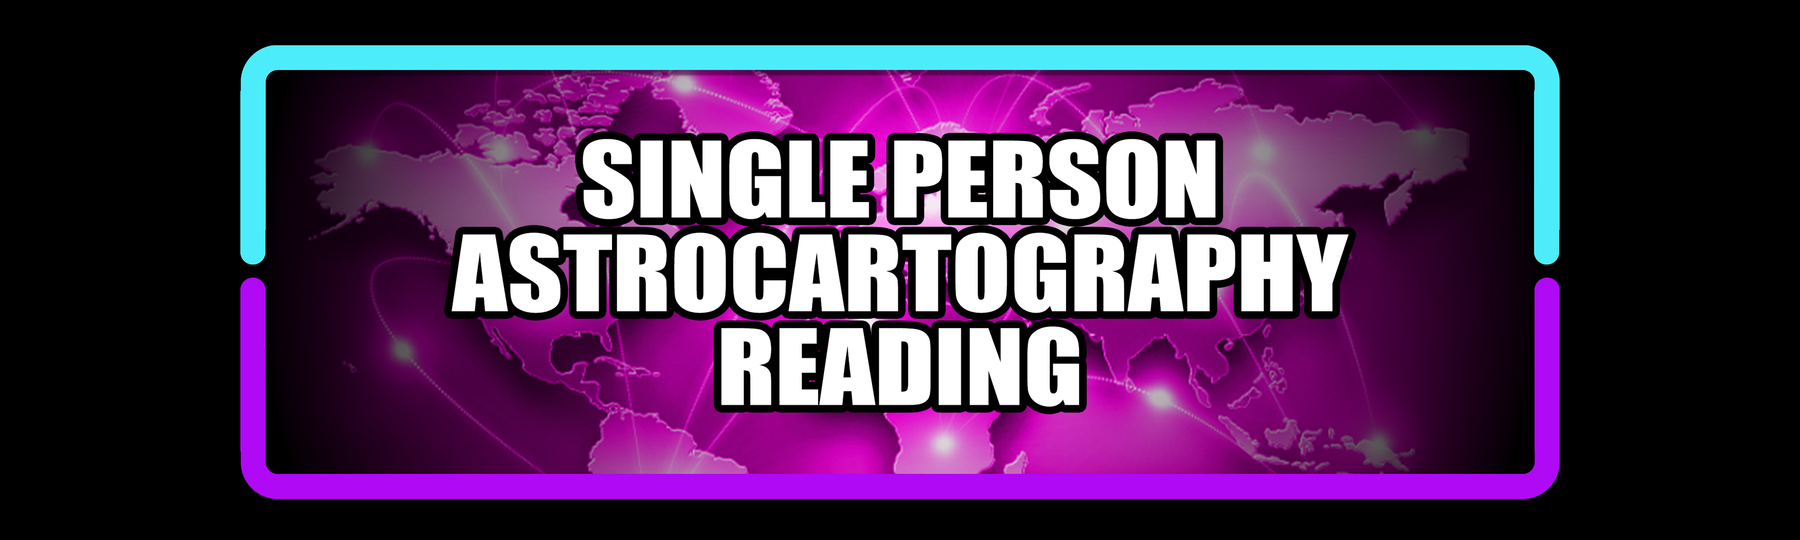 Single Person Astrocartography Reading